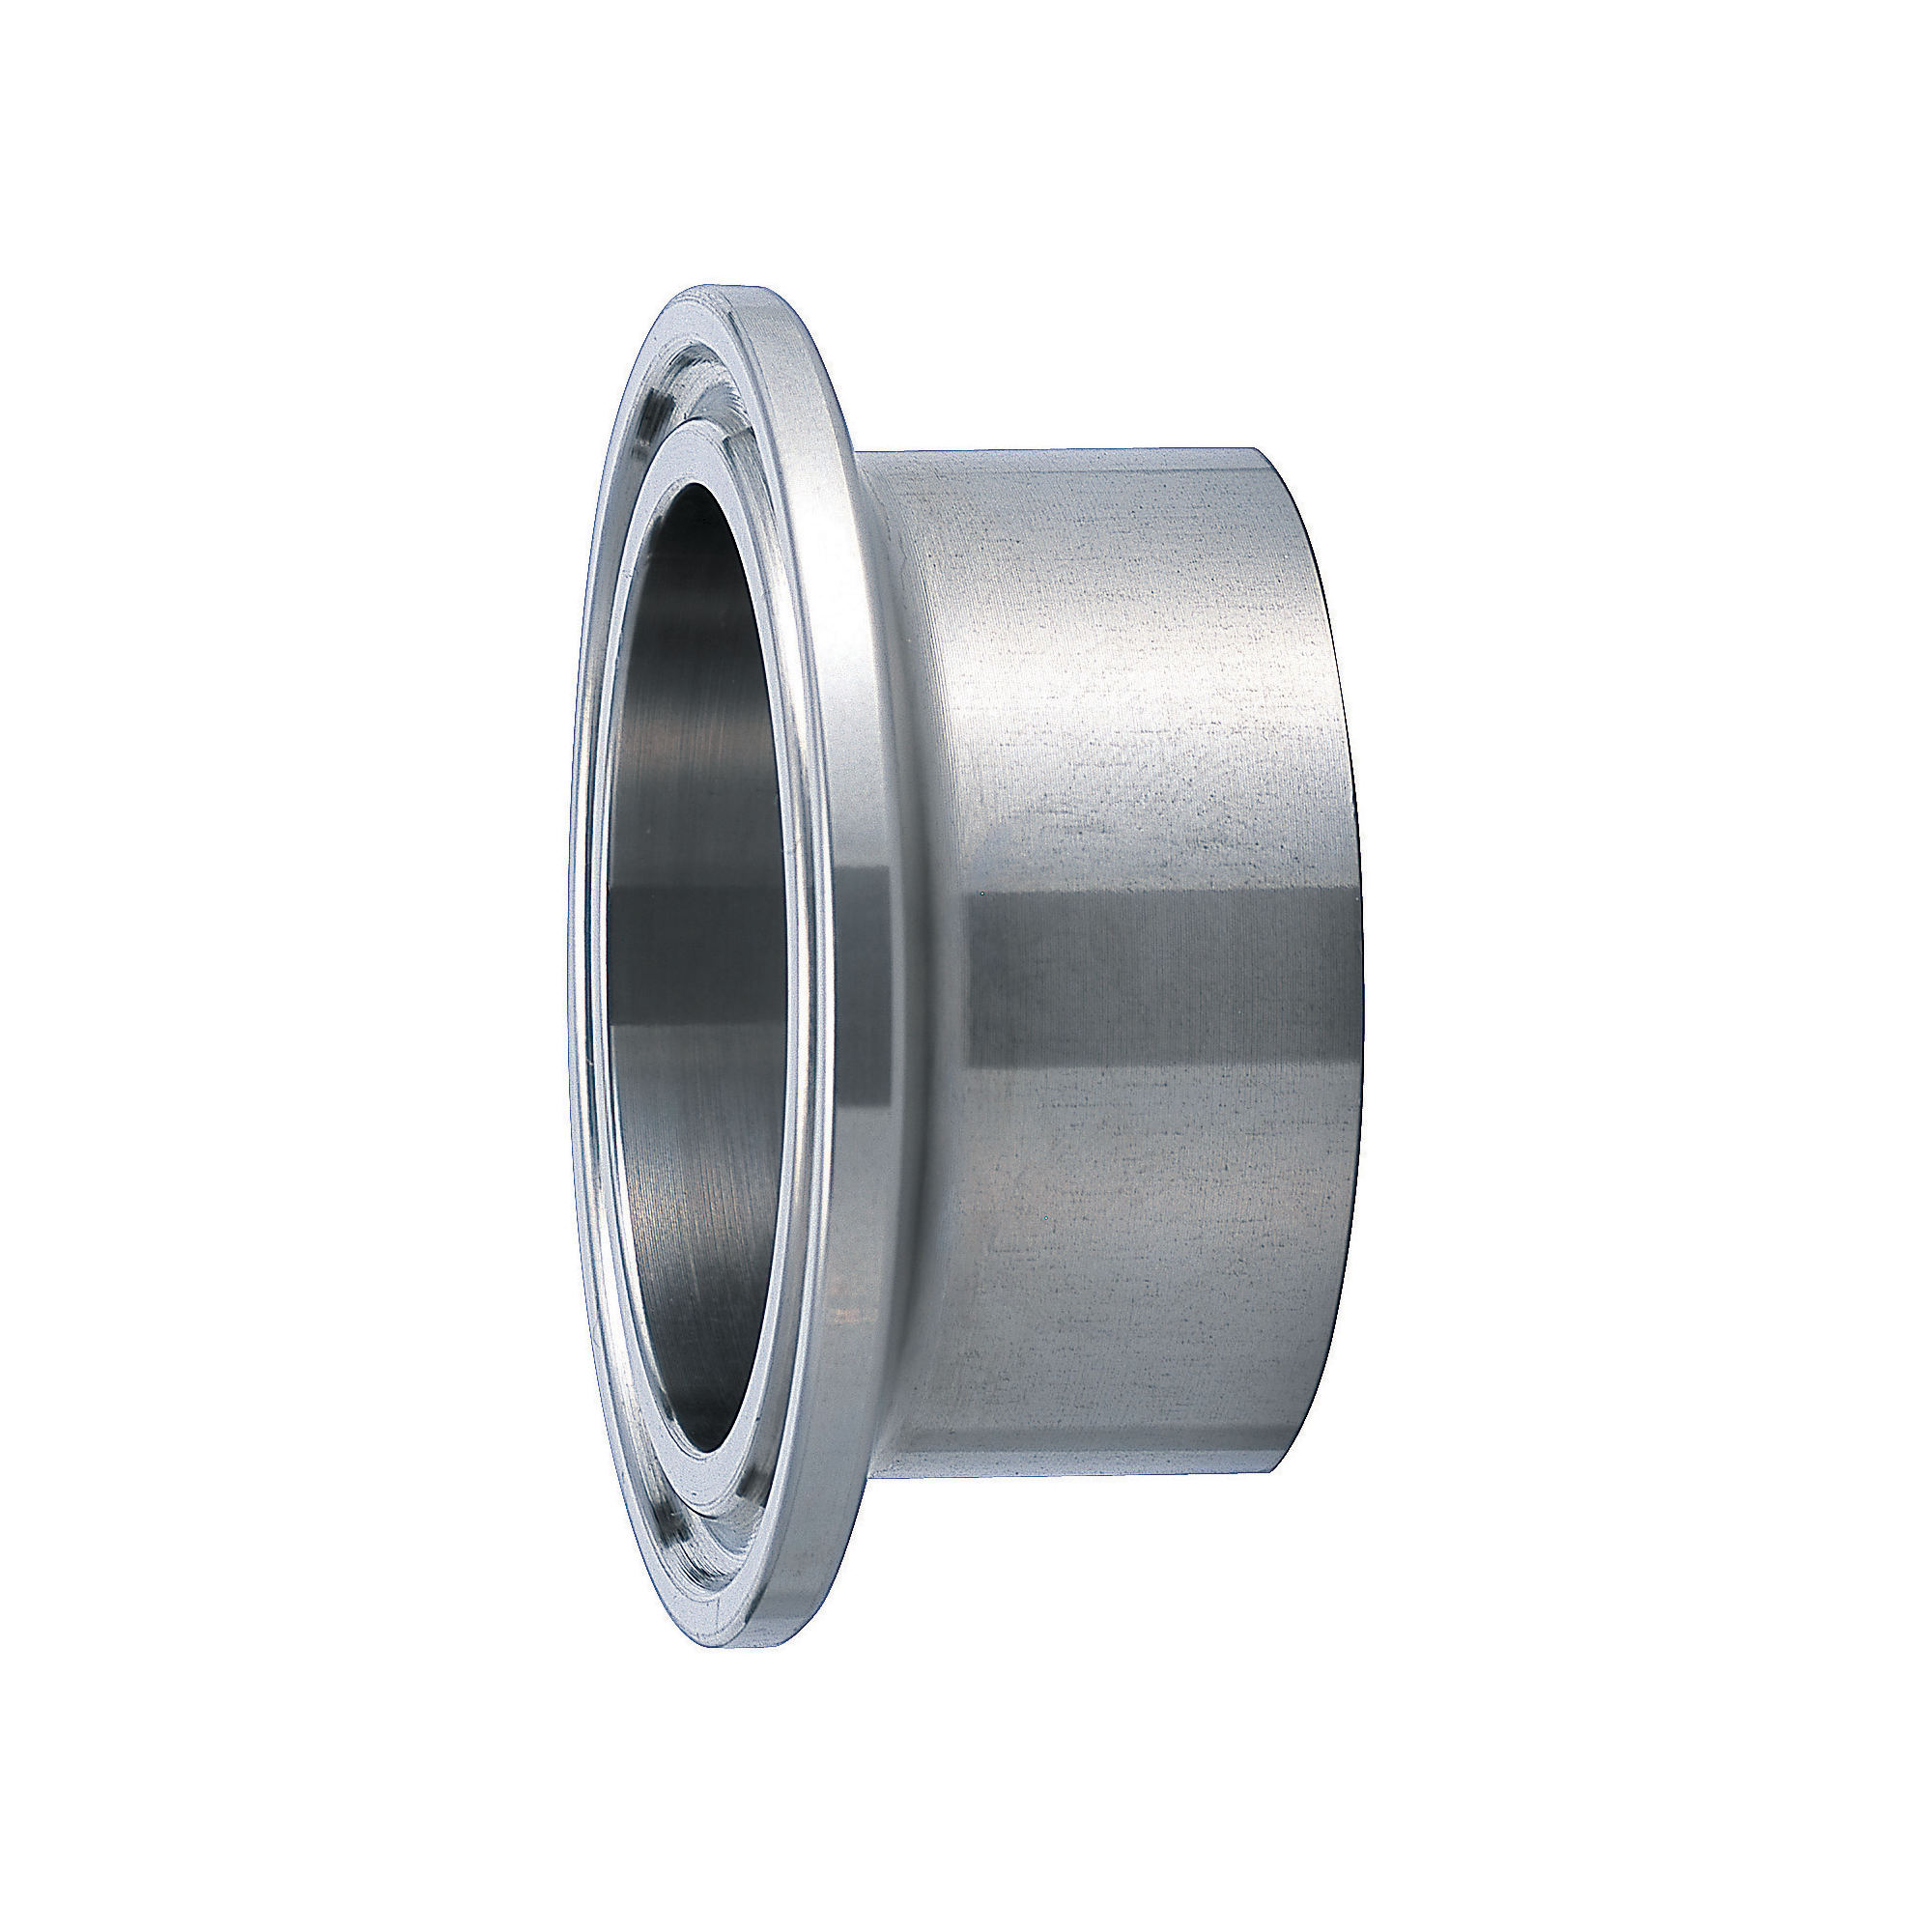 Specification : 38MM Pipe connector DN 19-102mm Full Port Ball Valve Clamp Type Ferrule Stainless Steel SS SUS 304 Sanitary 